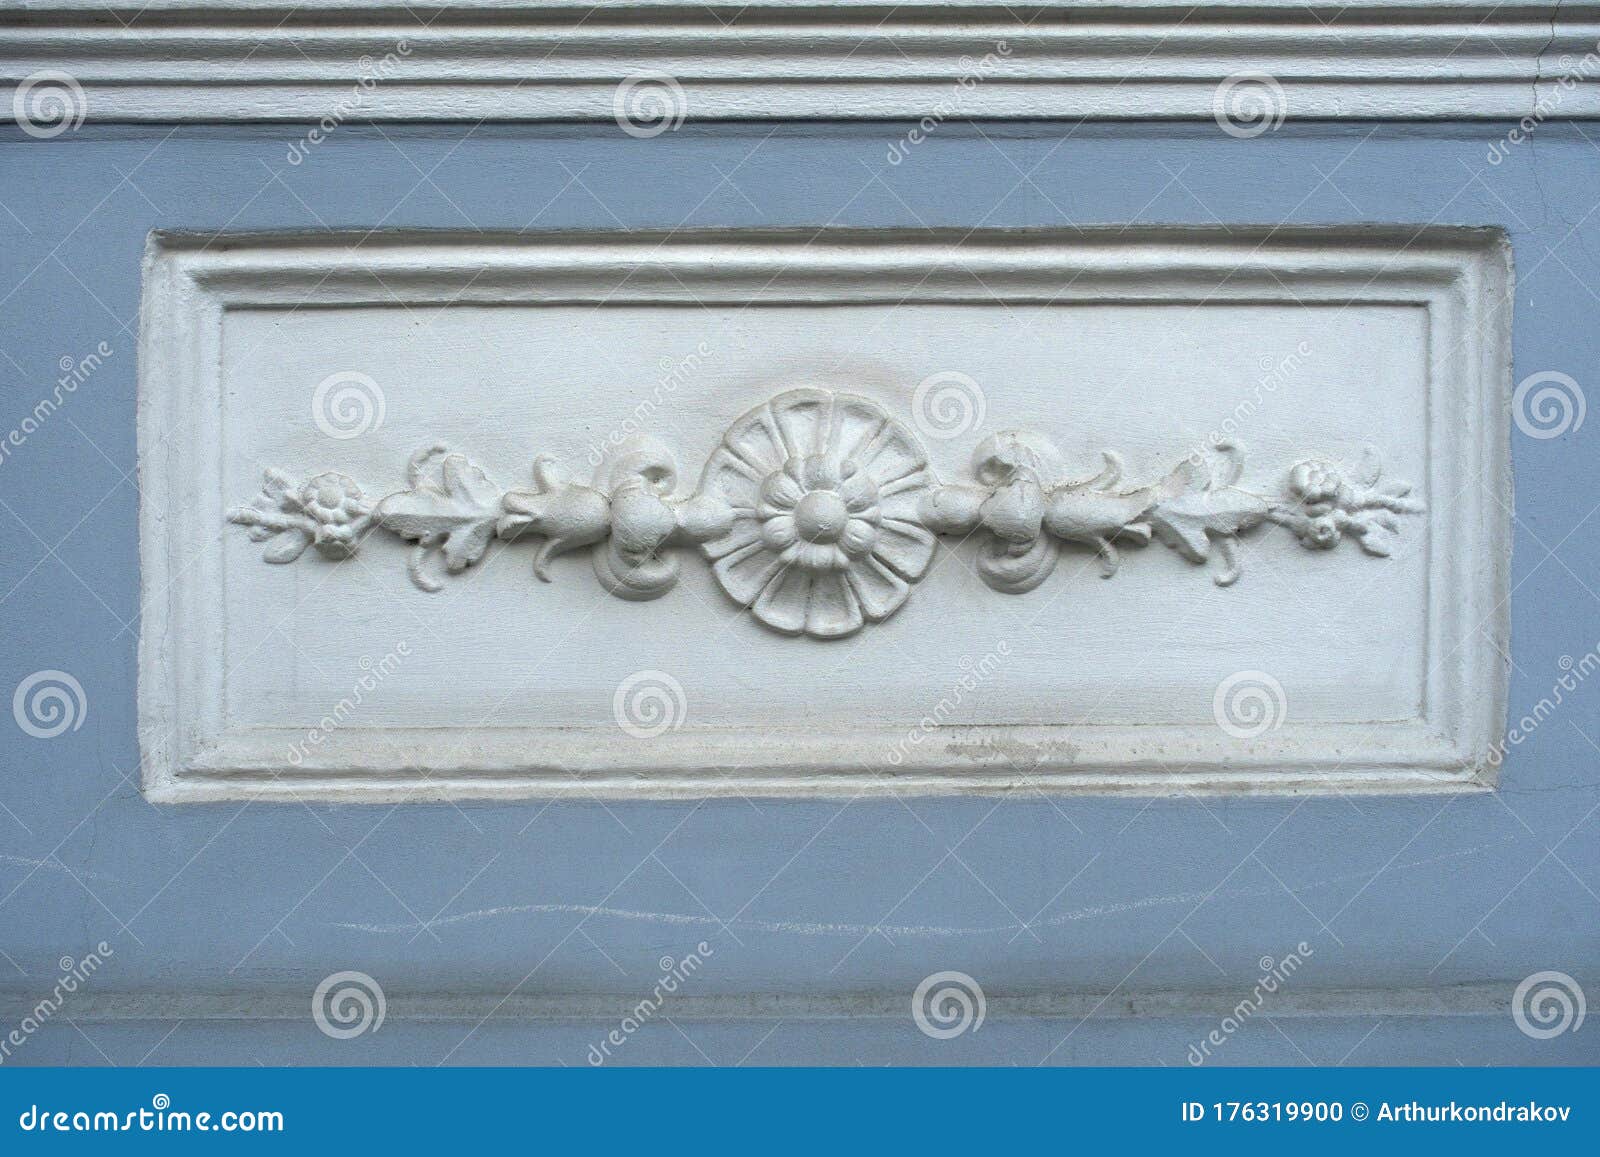 Antique Plaster Decoration On The Wall Stock Photo Image Of Grungy Good